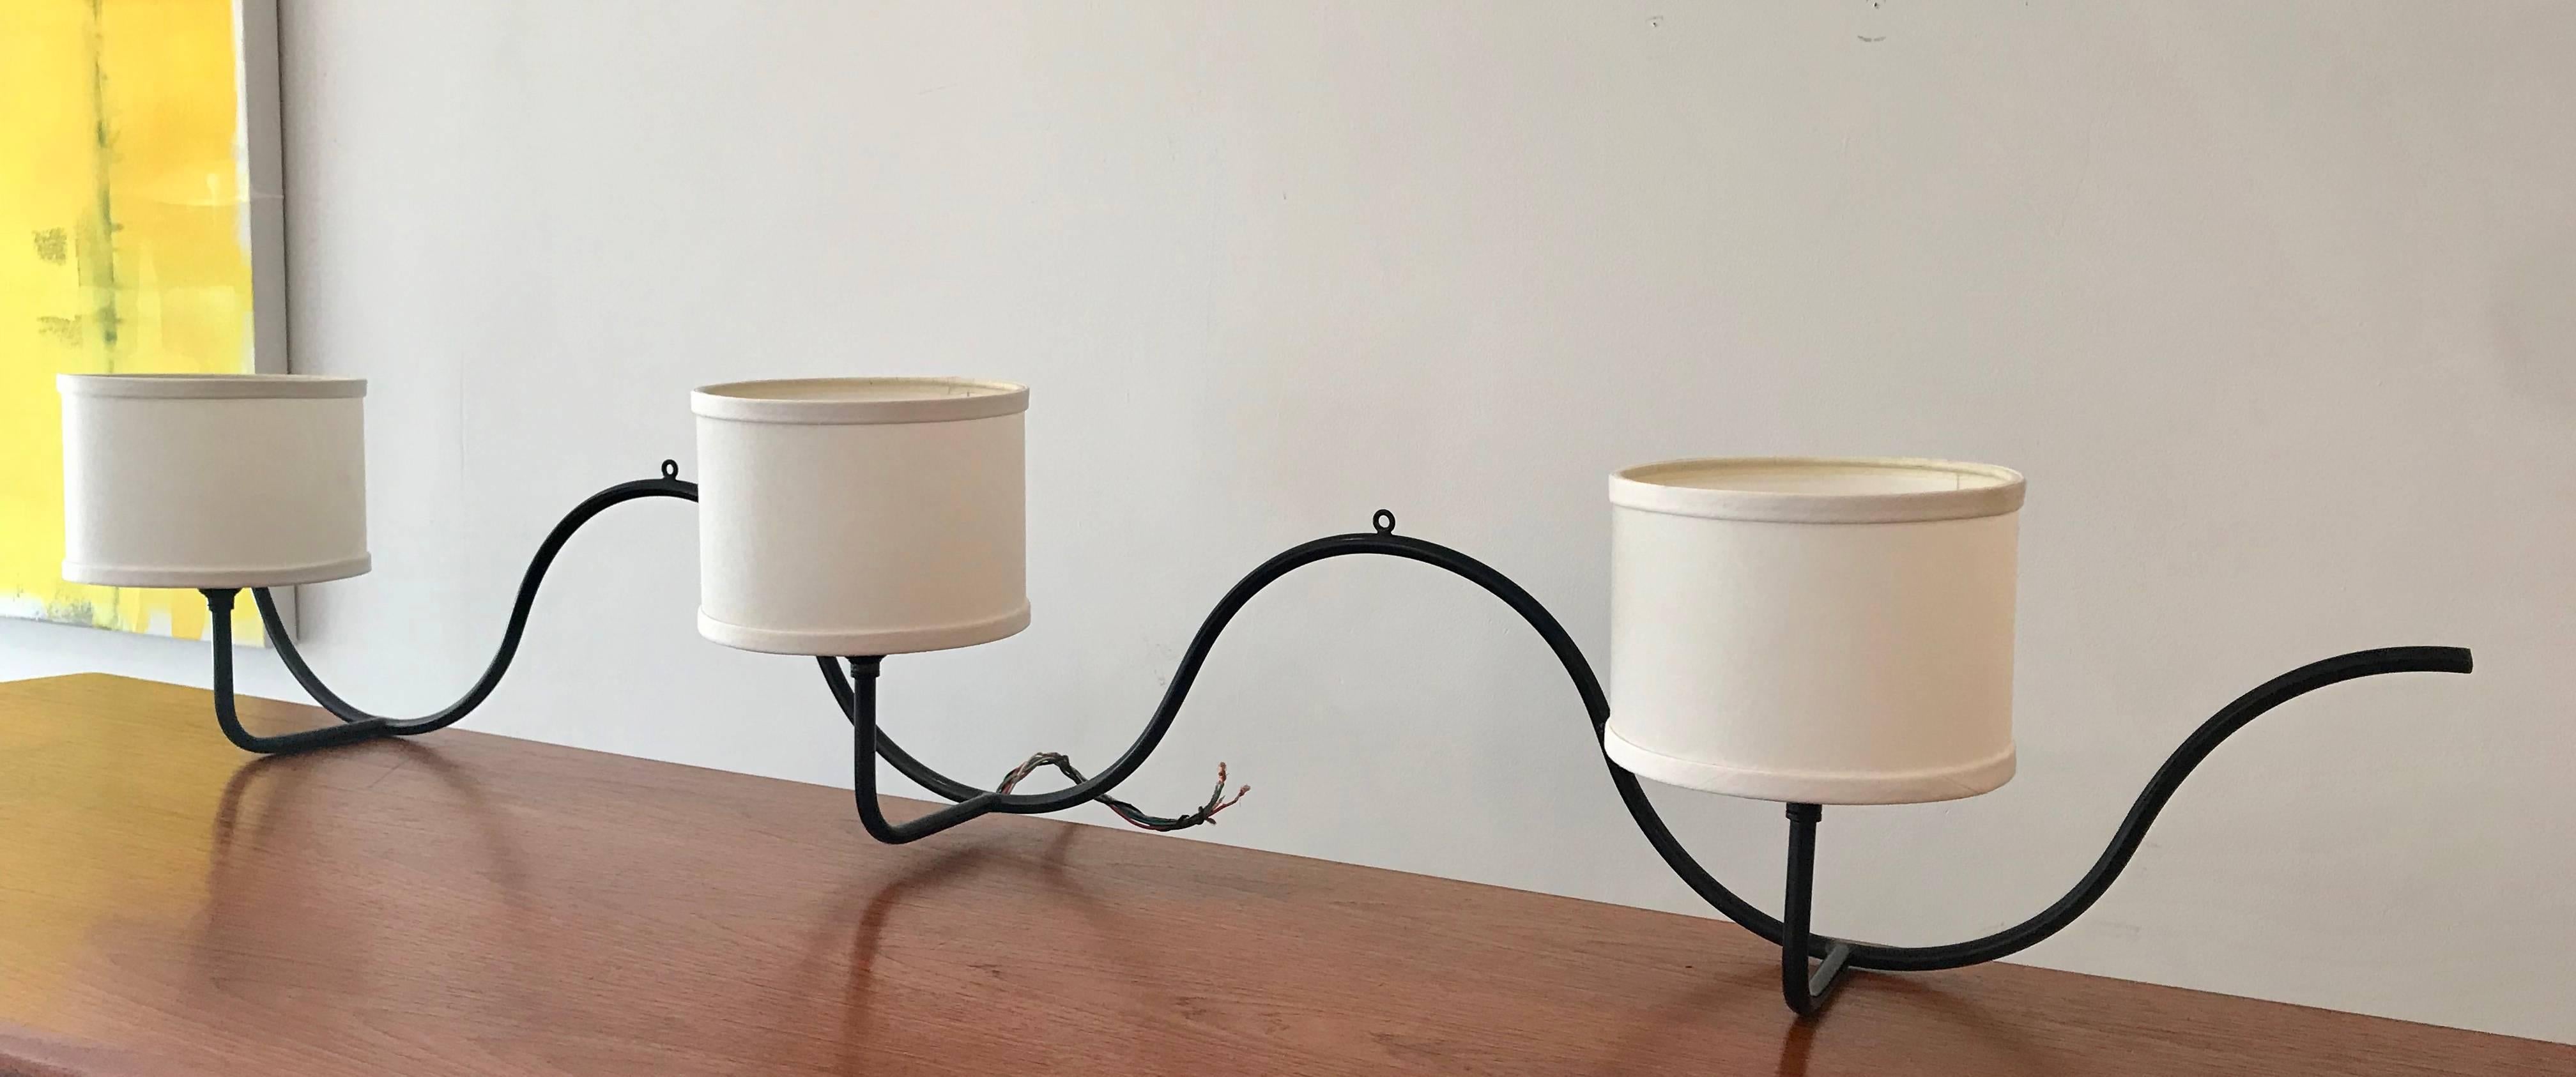 Very rare wrought iron three-light wall lamp by Jean Royere, 1940s. All original with the exception of the shades, that unfortunately are stained, easily replaceable. Rewiring recommended.

A self-taught French craftsman, decorator and furniture